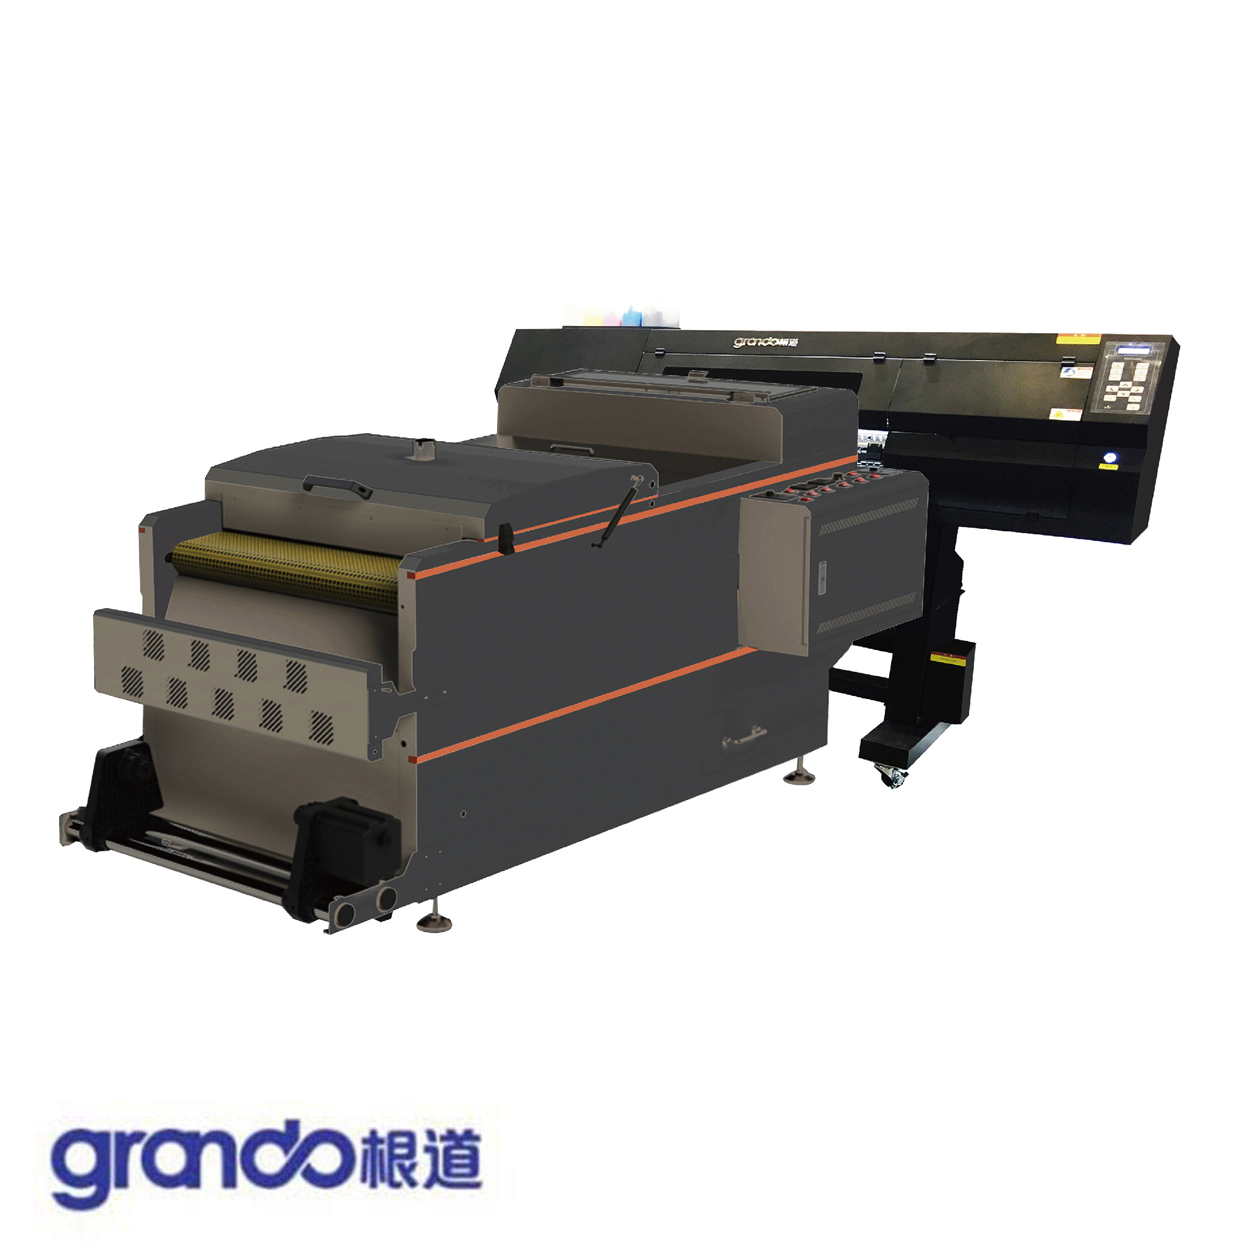 DTF Heat Transfer digital printer with belt system for cotton t-shirt printing 